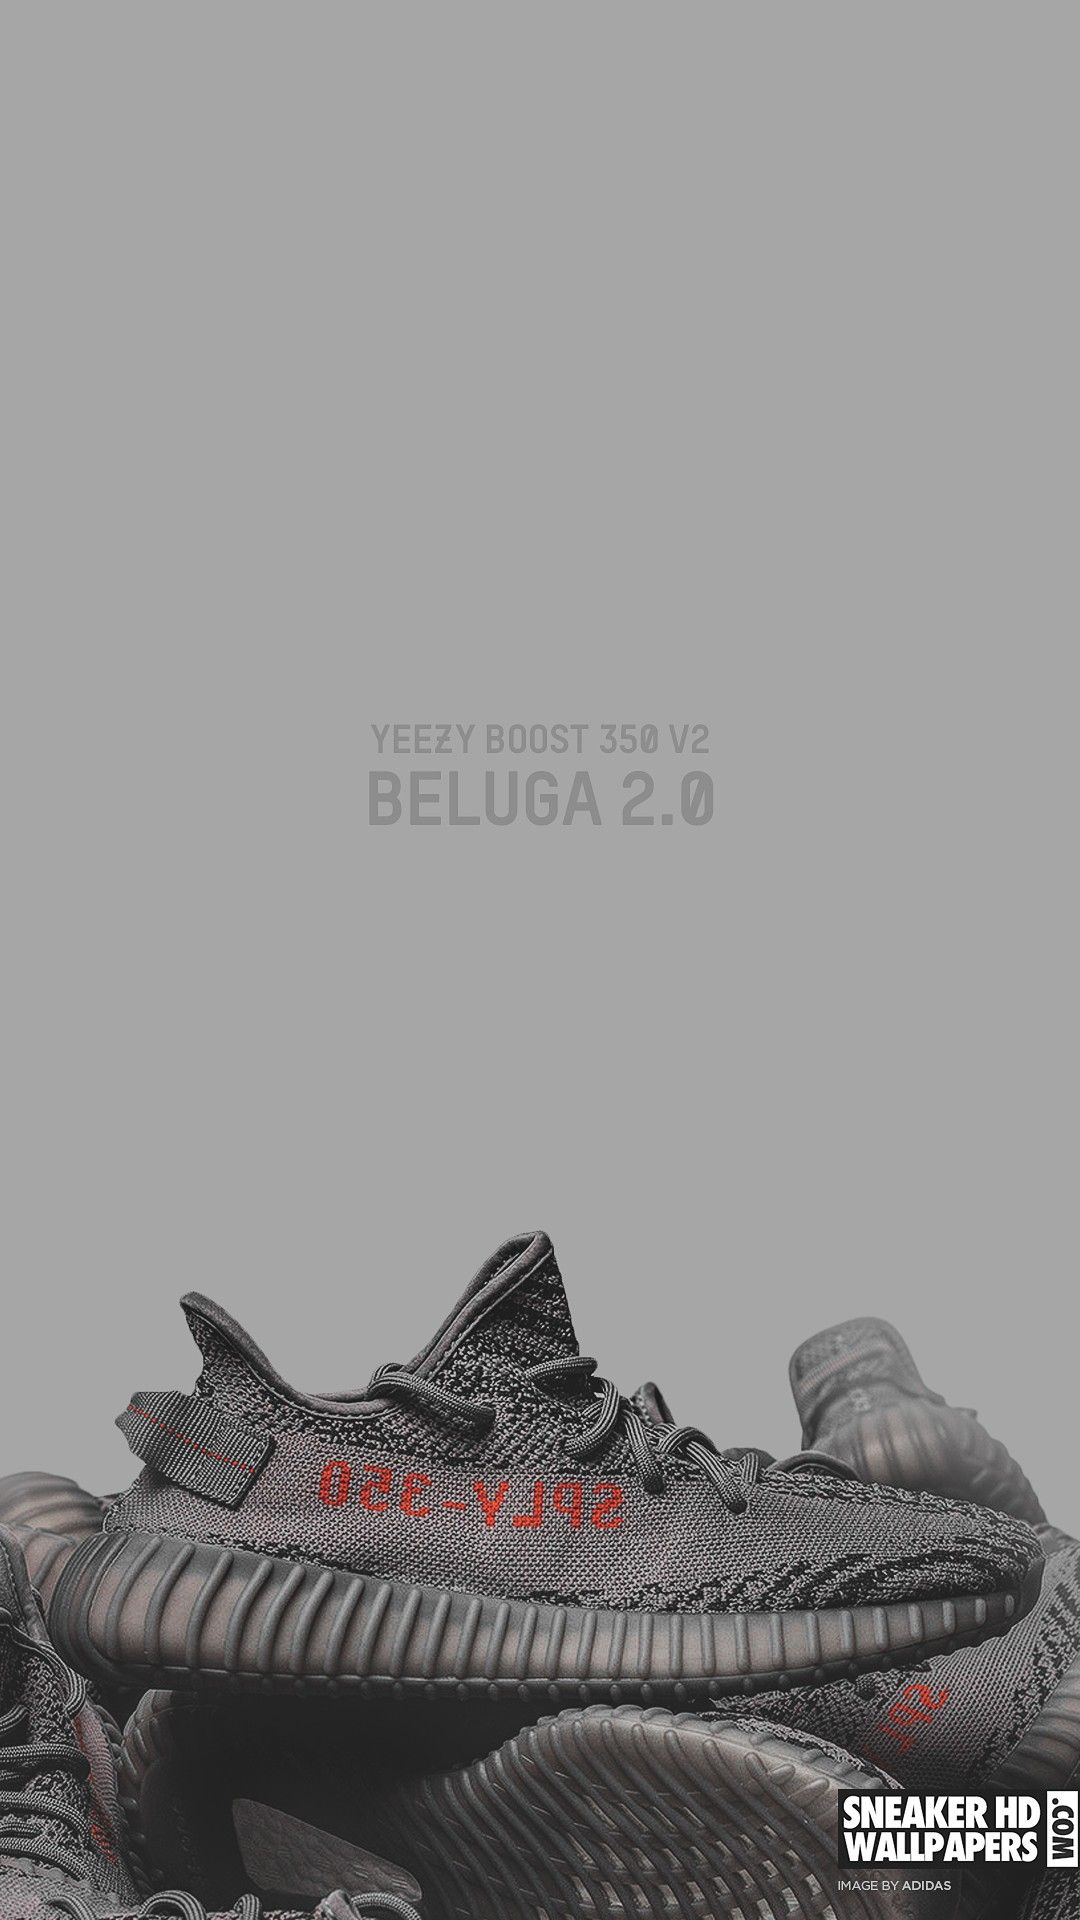 rune is hype on Shoes in 2019 Shoes wallpaper Yeezy